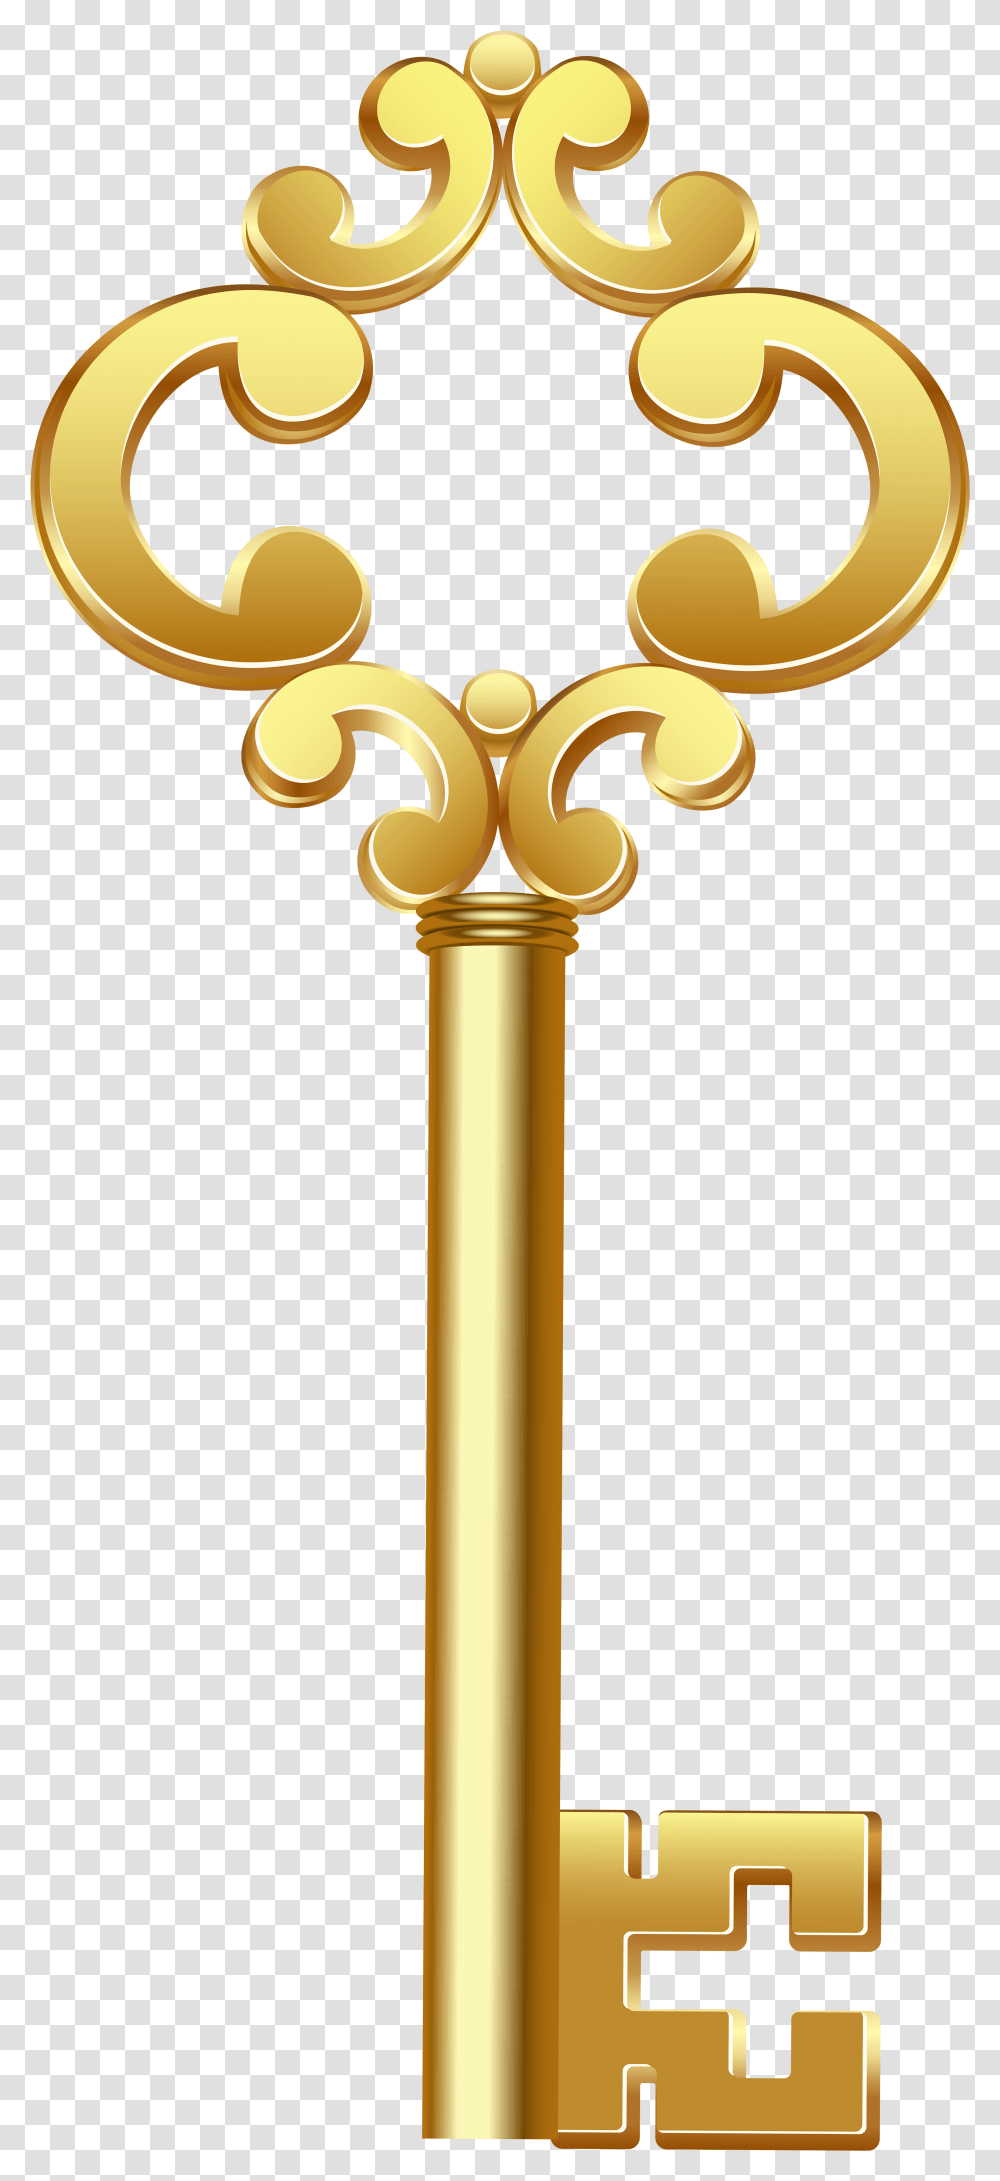 Library Of Gold House Royalty Free Gold Key, Cross, Symbol, Trophy Transparent Png